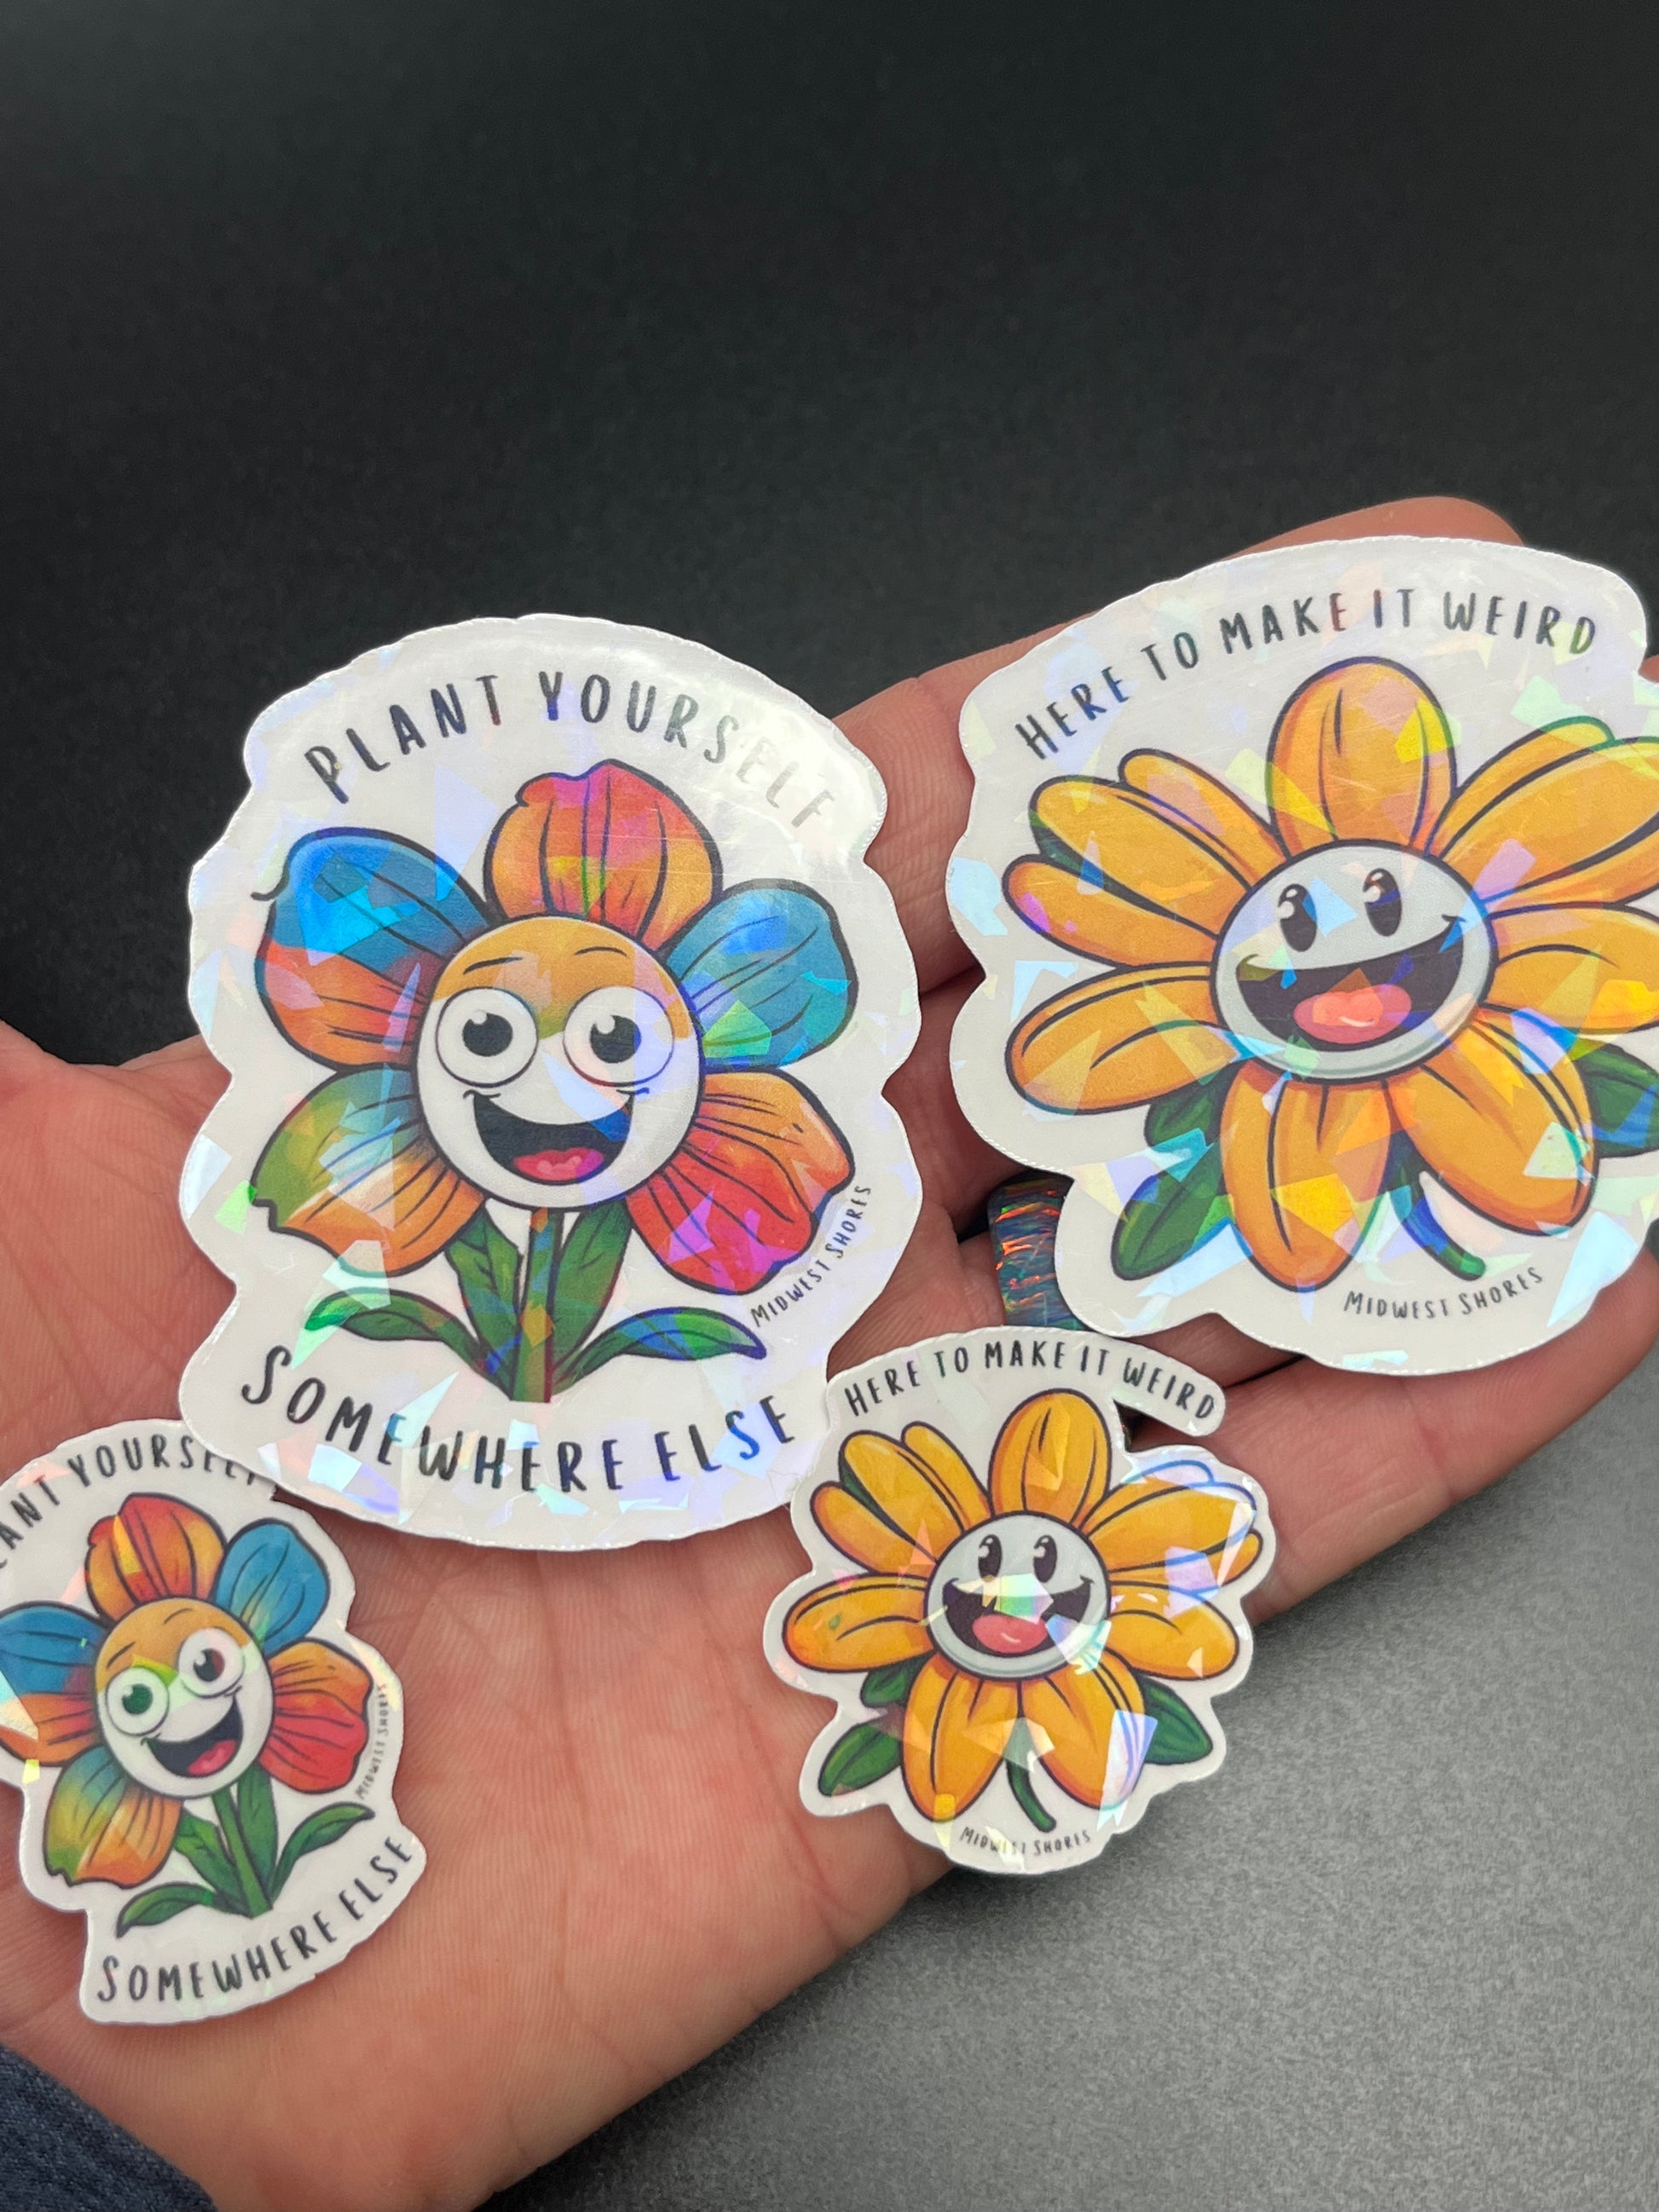 “Plant yourself somewhere else” Daisy sticker and “here to make it weird” daisy sticker 